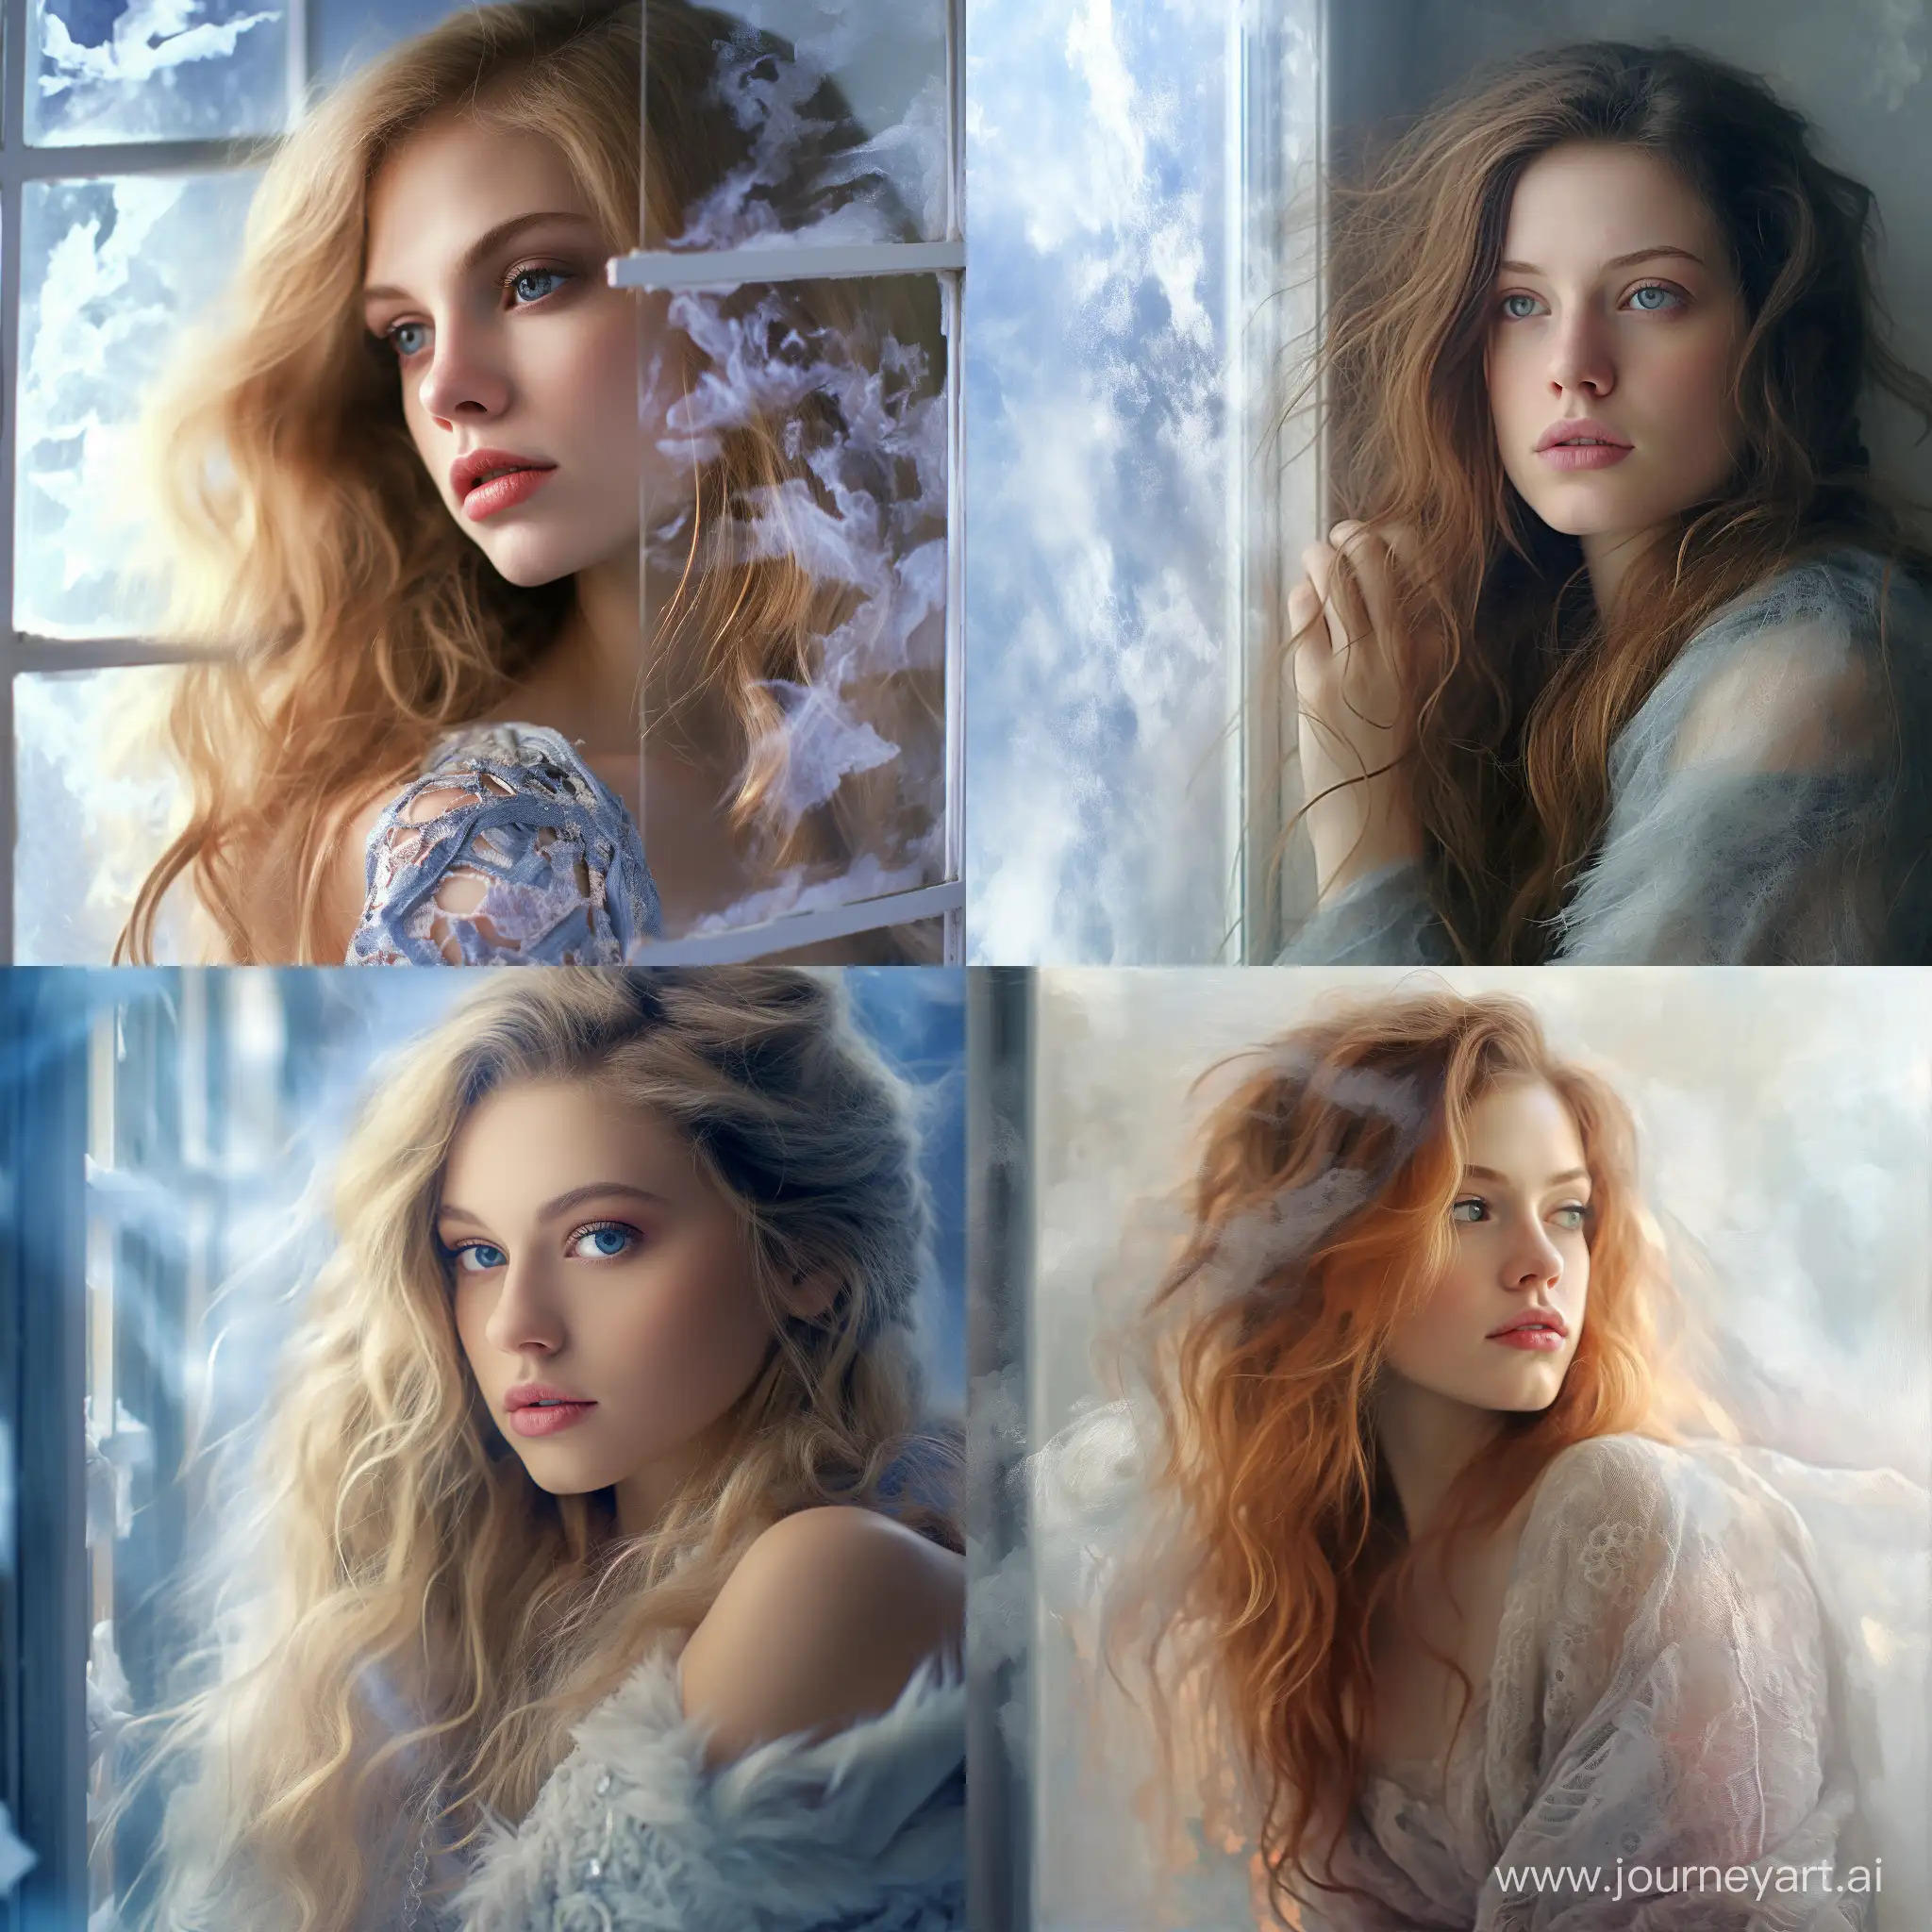 Dreamy-Young-Woman-Gazing-Through-Frosted-Window-in-Hyperrealistic-Pixel-Art